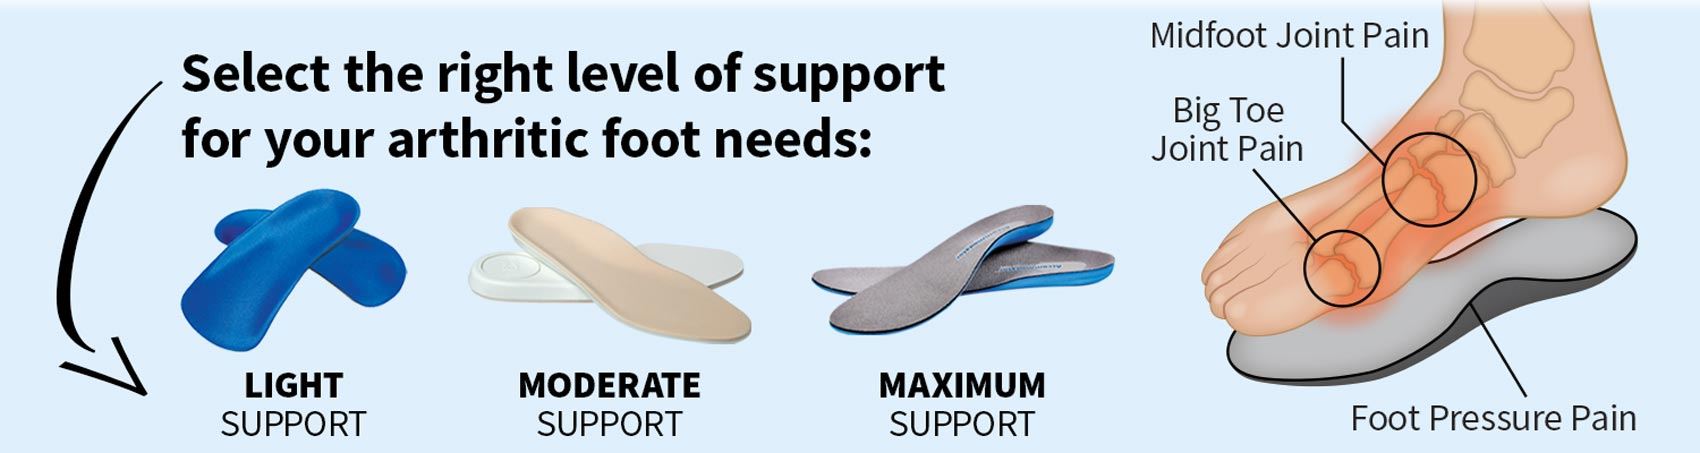 Select the right level of support for your arthritic foot needs